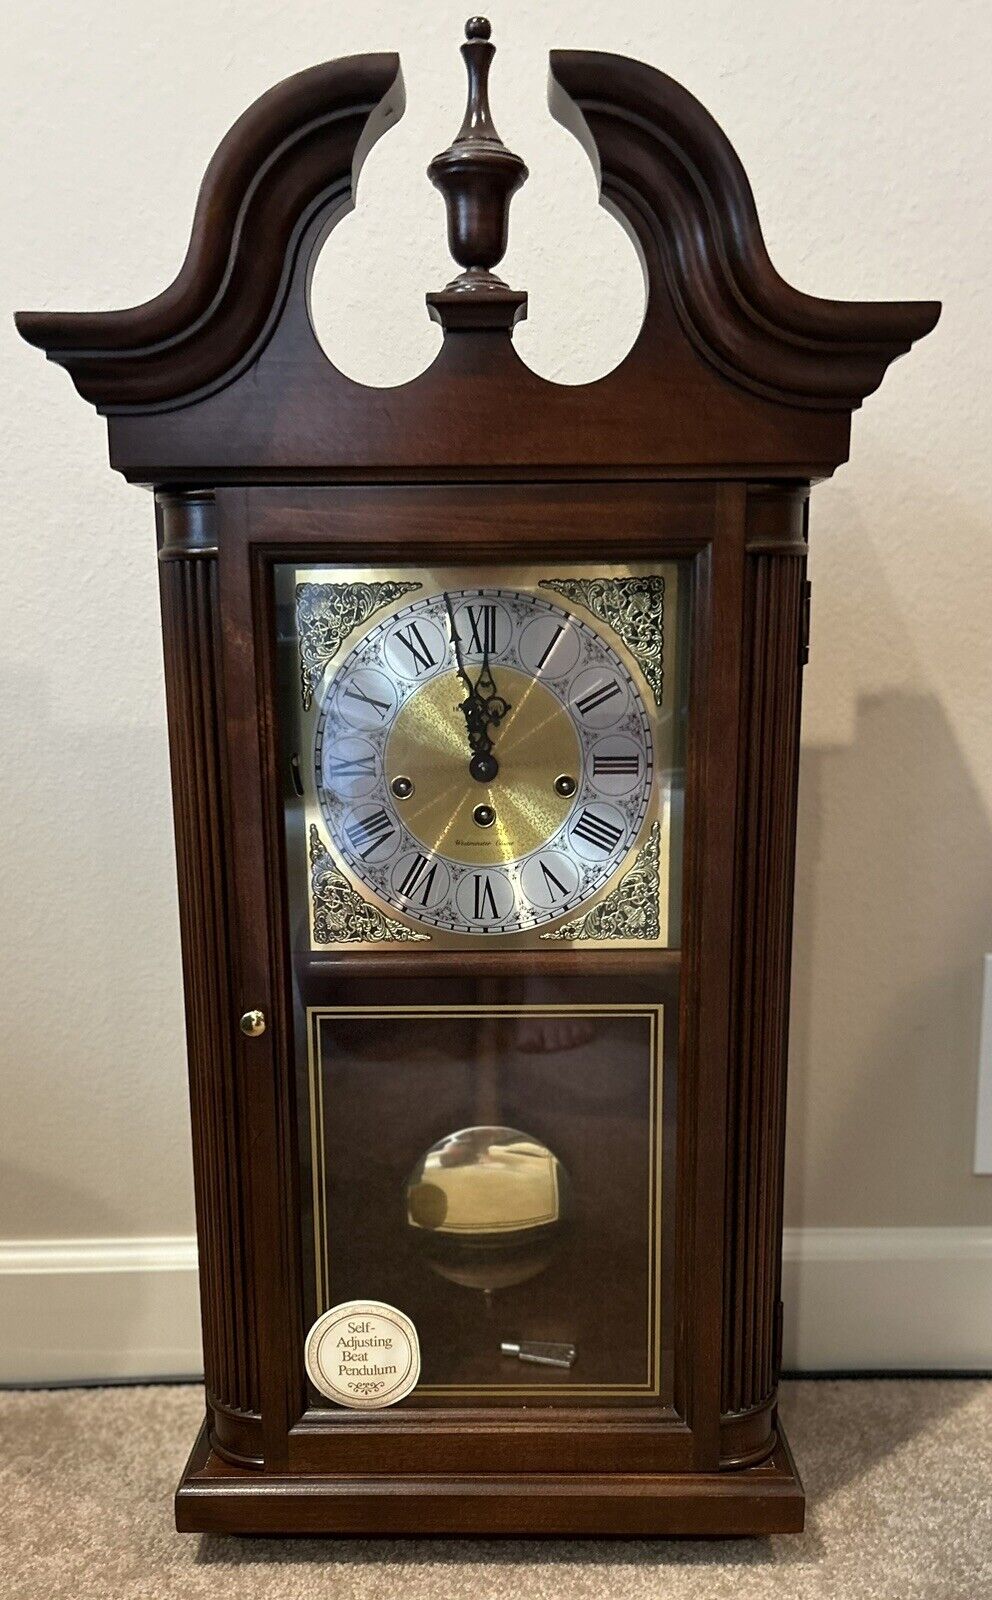 RARE Howard Miller Westminster Chime Wall Clock 613-424